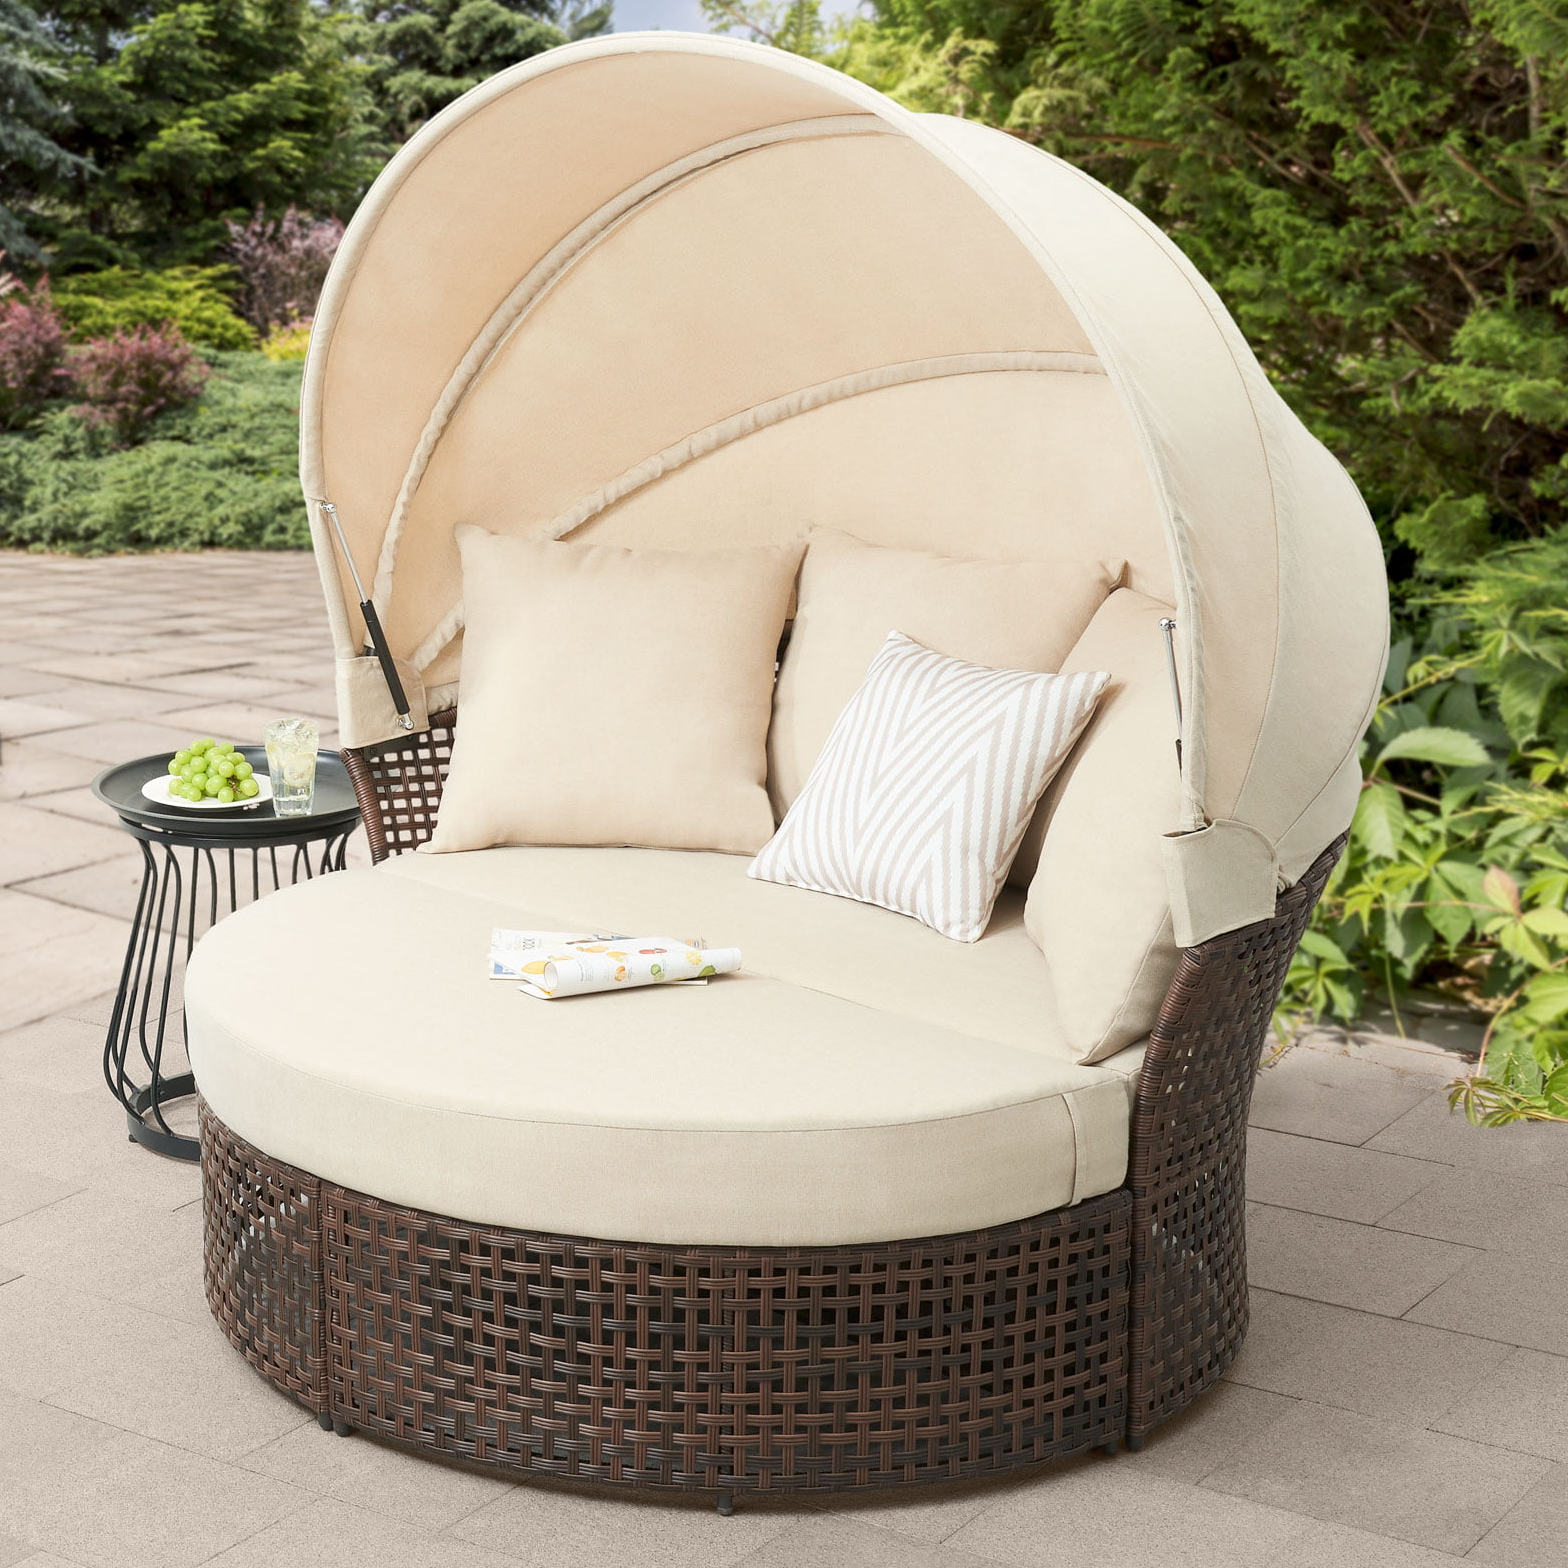 Mainstays Tuscany Ridge 2-Piece Outdoor Daybed with Retractable Canopy, Beige - image 1 of 10